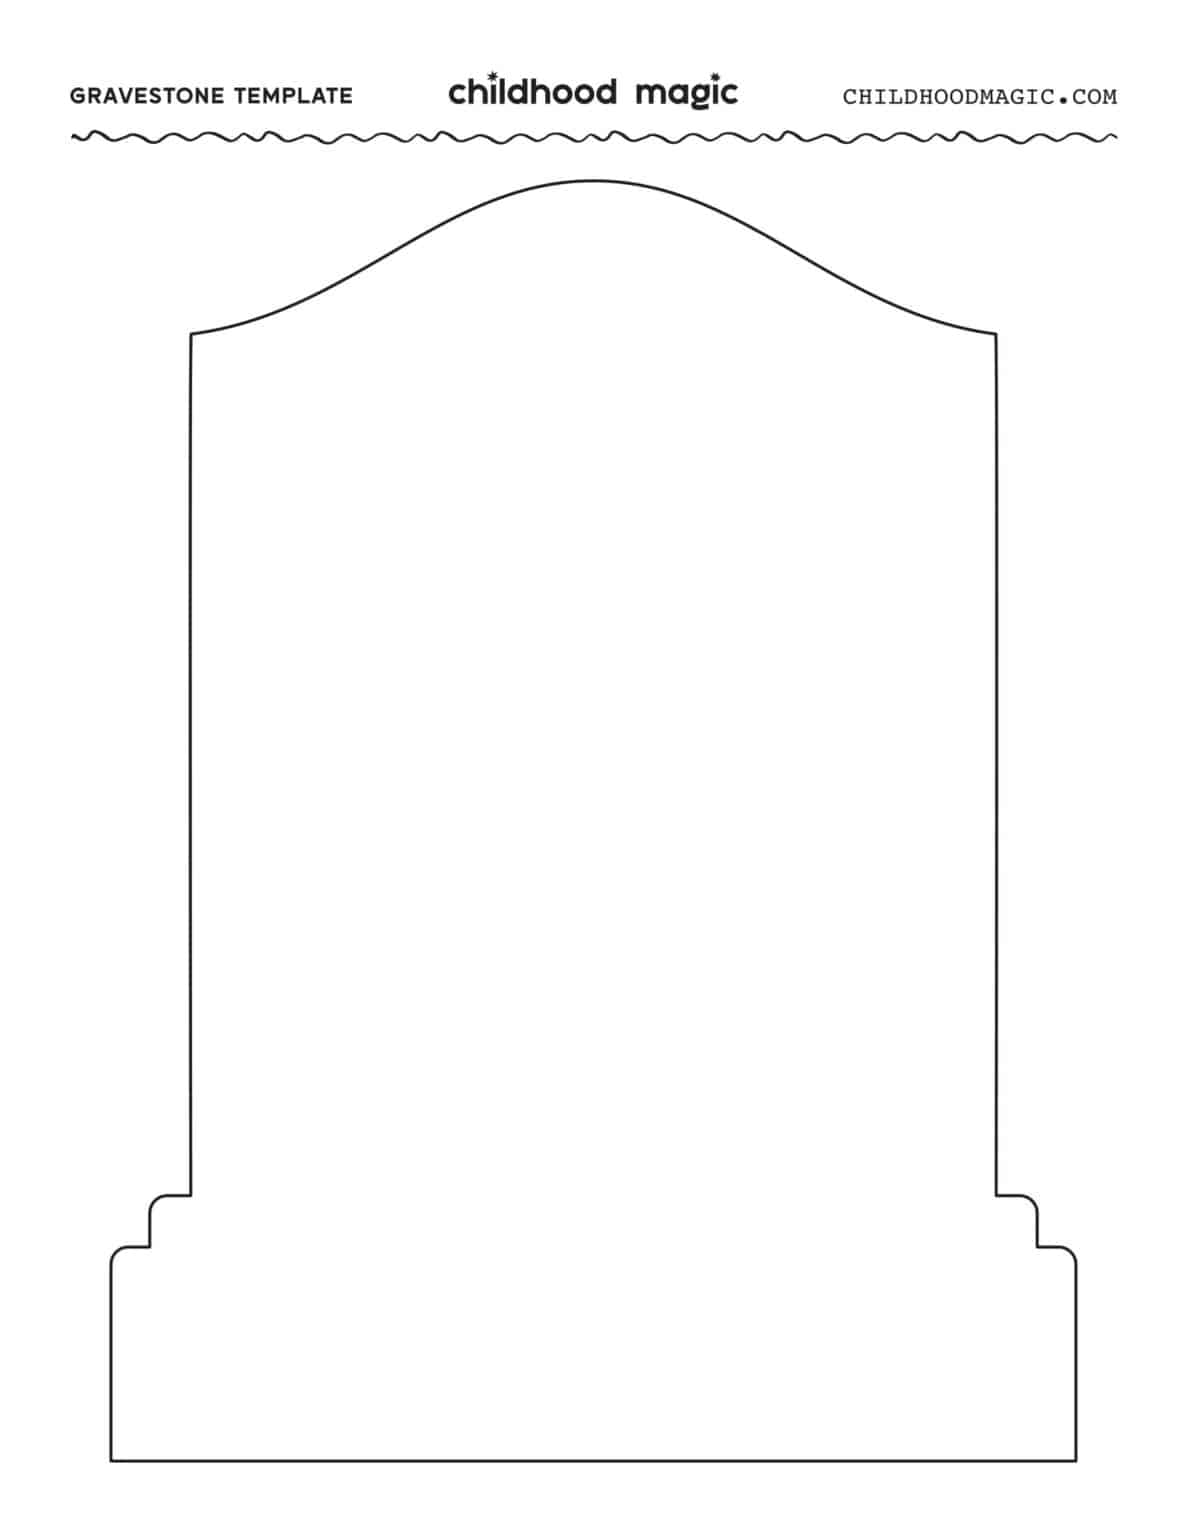 Tombstone Outline